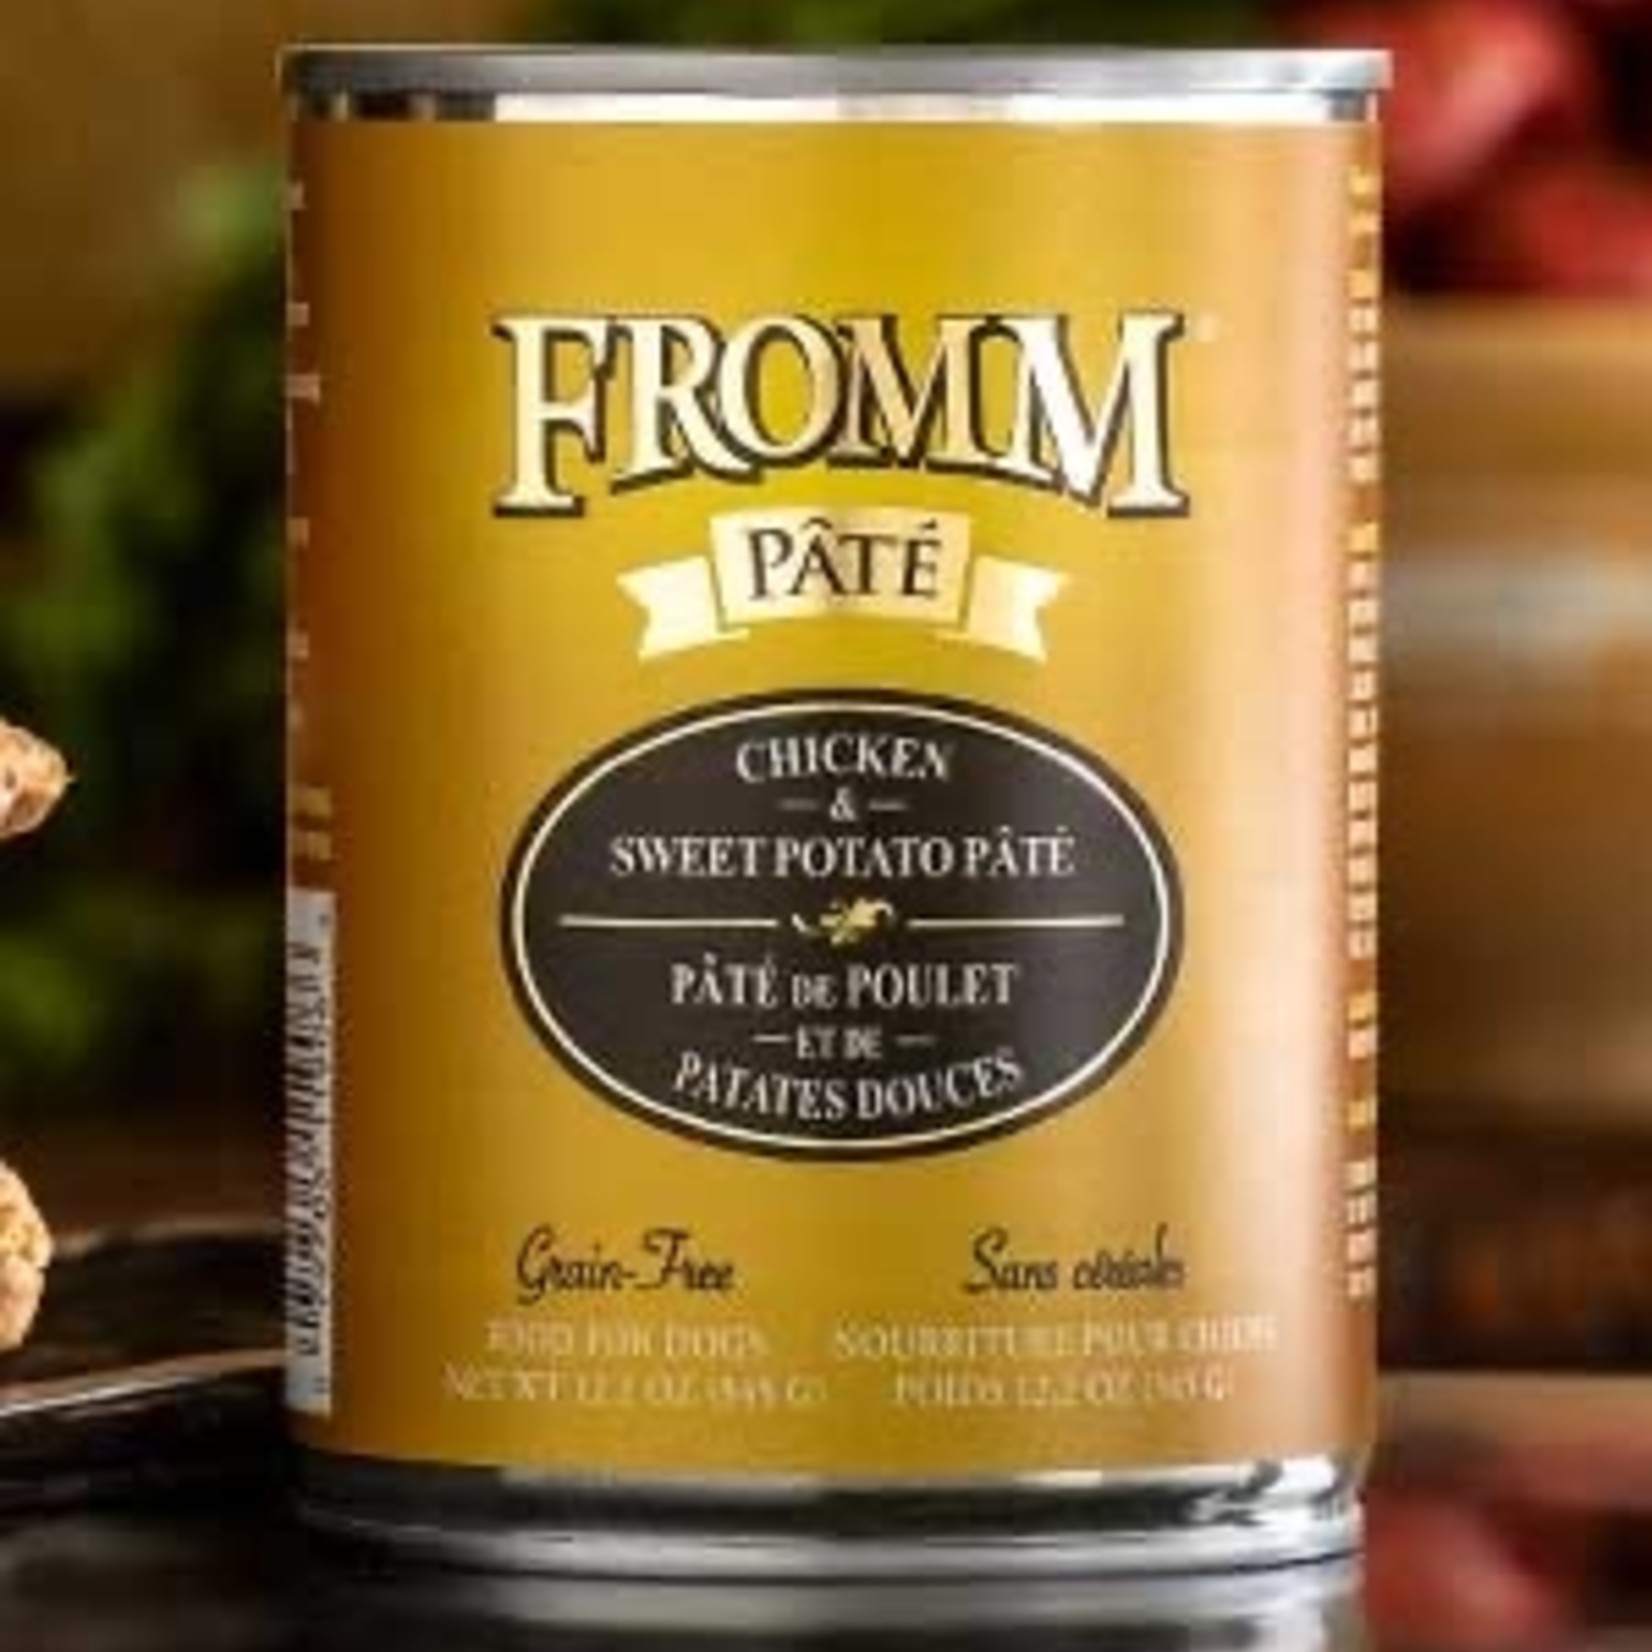 FROMM Fromm CHICKEN S.POTATO PATE 12.2OZ